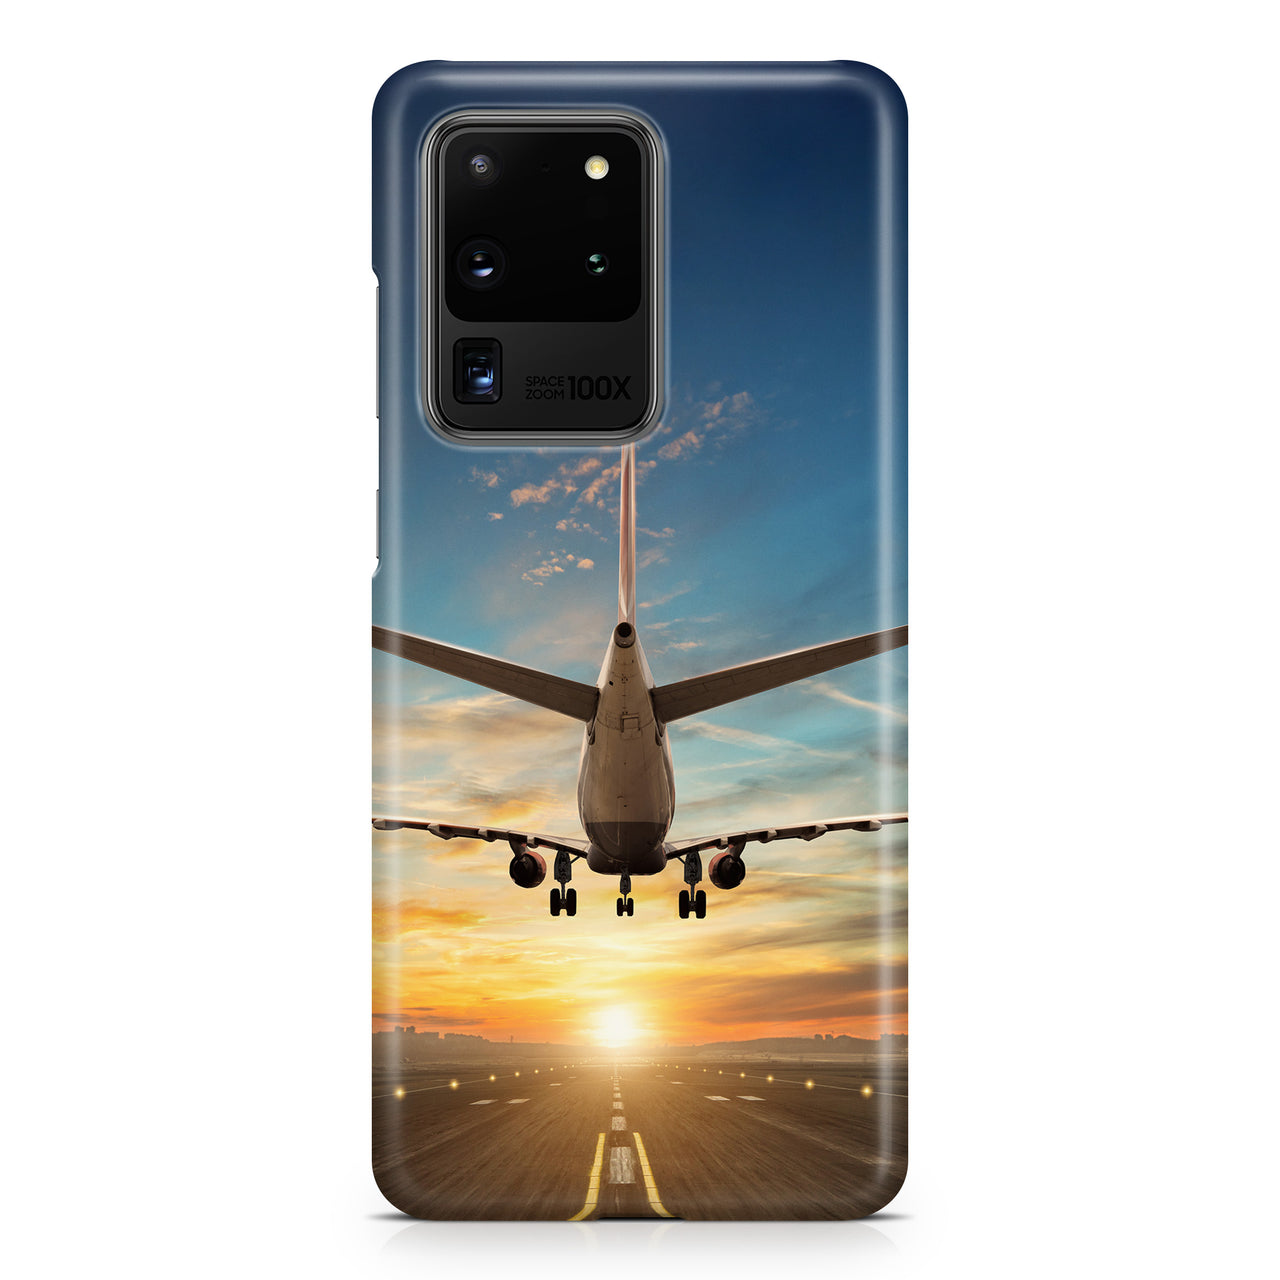 Airplane over Runway Towards the Sunrise Samsung A Cases